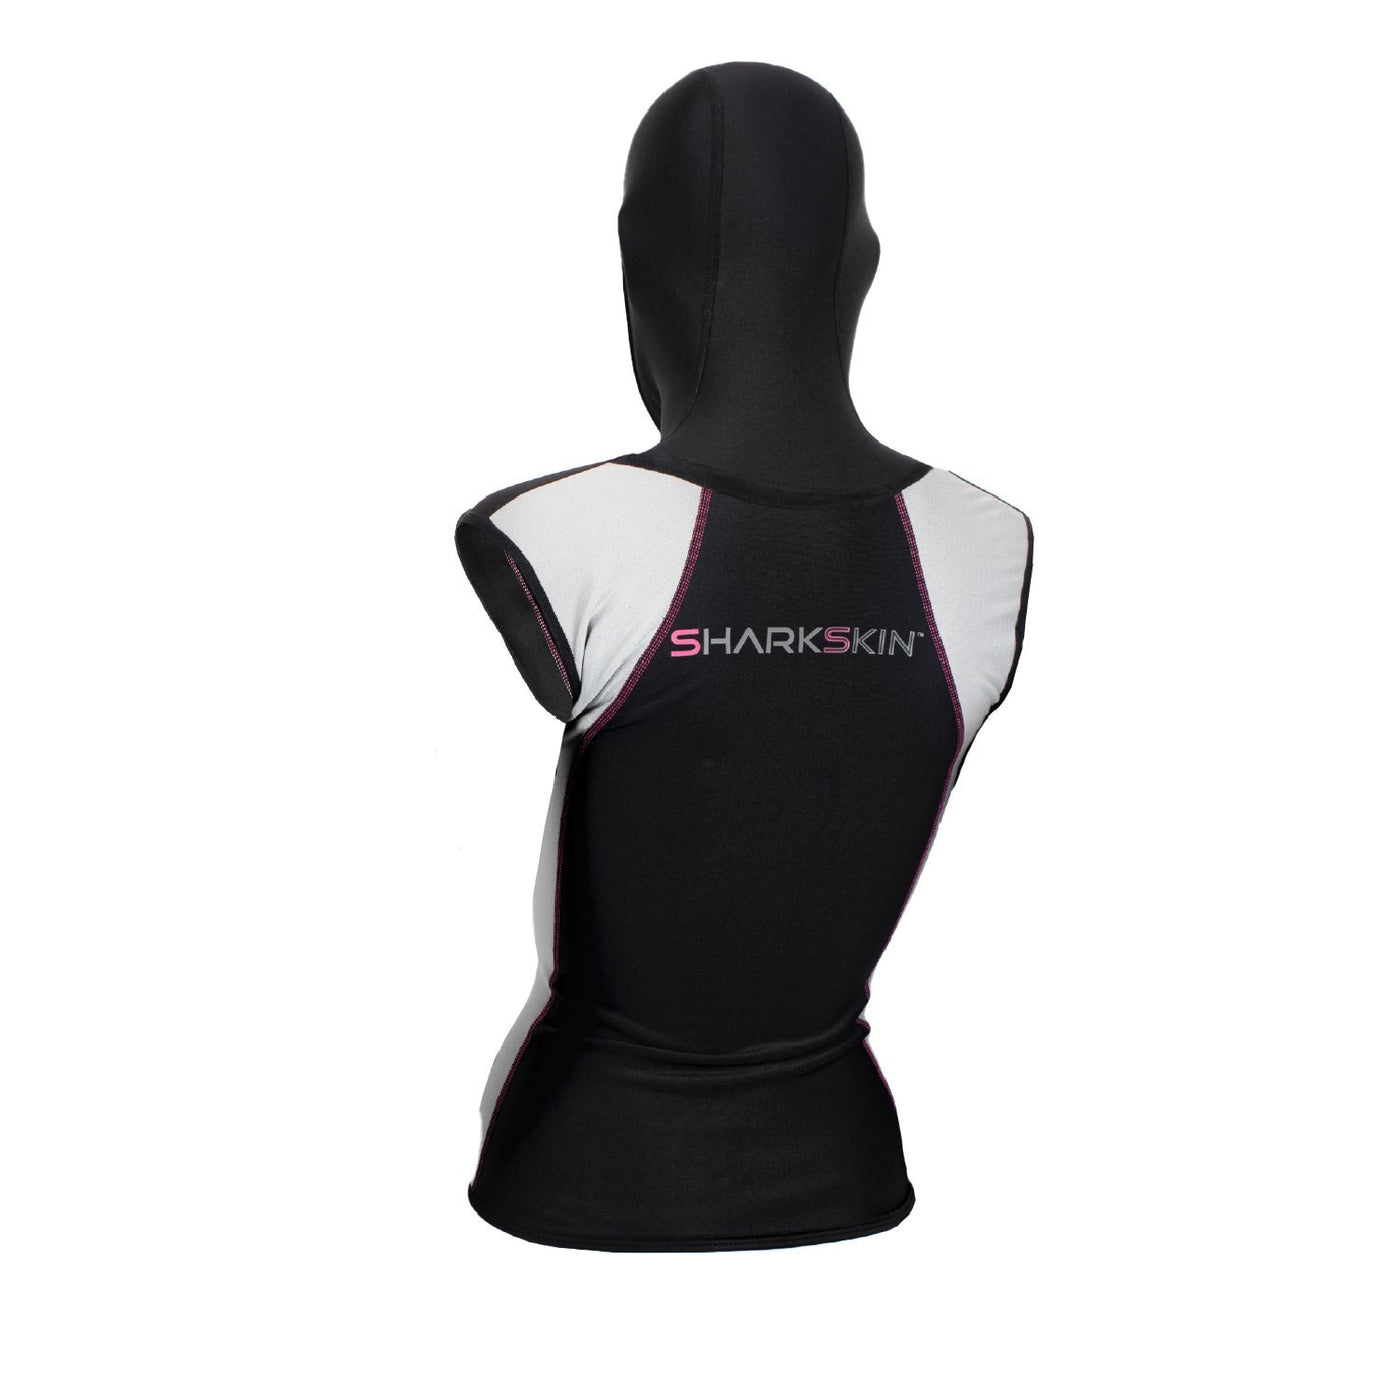 Sharkskin Chillproof Vest with Hood - Womens